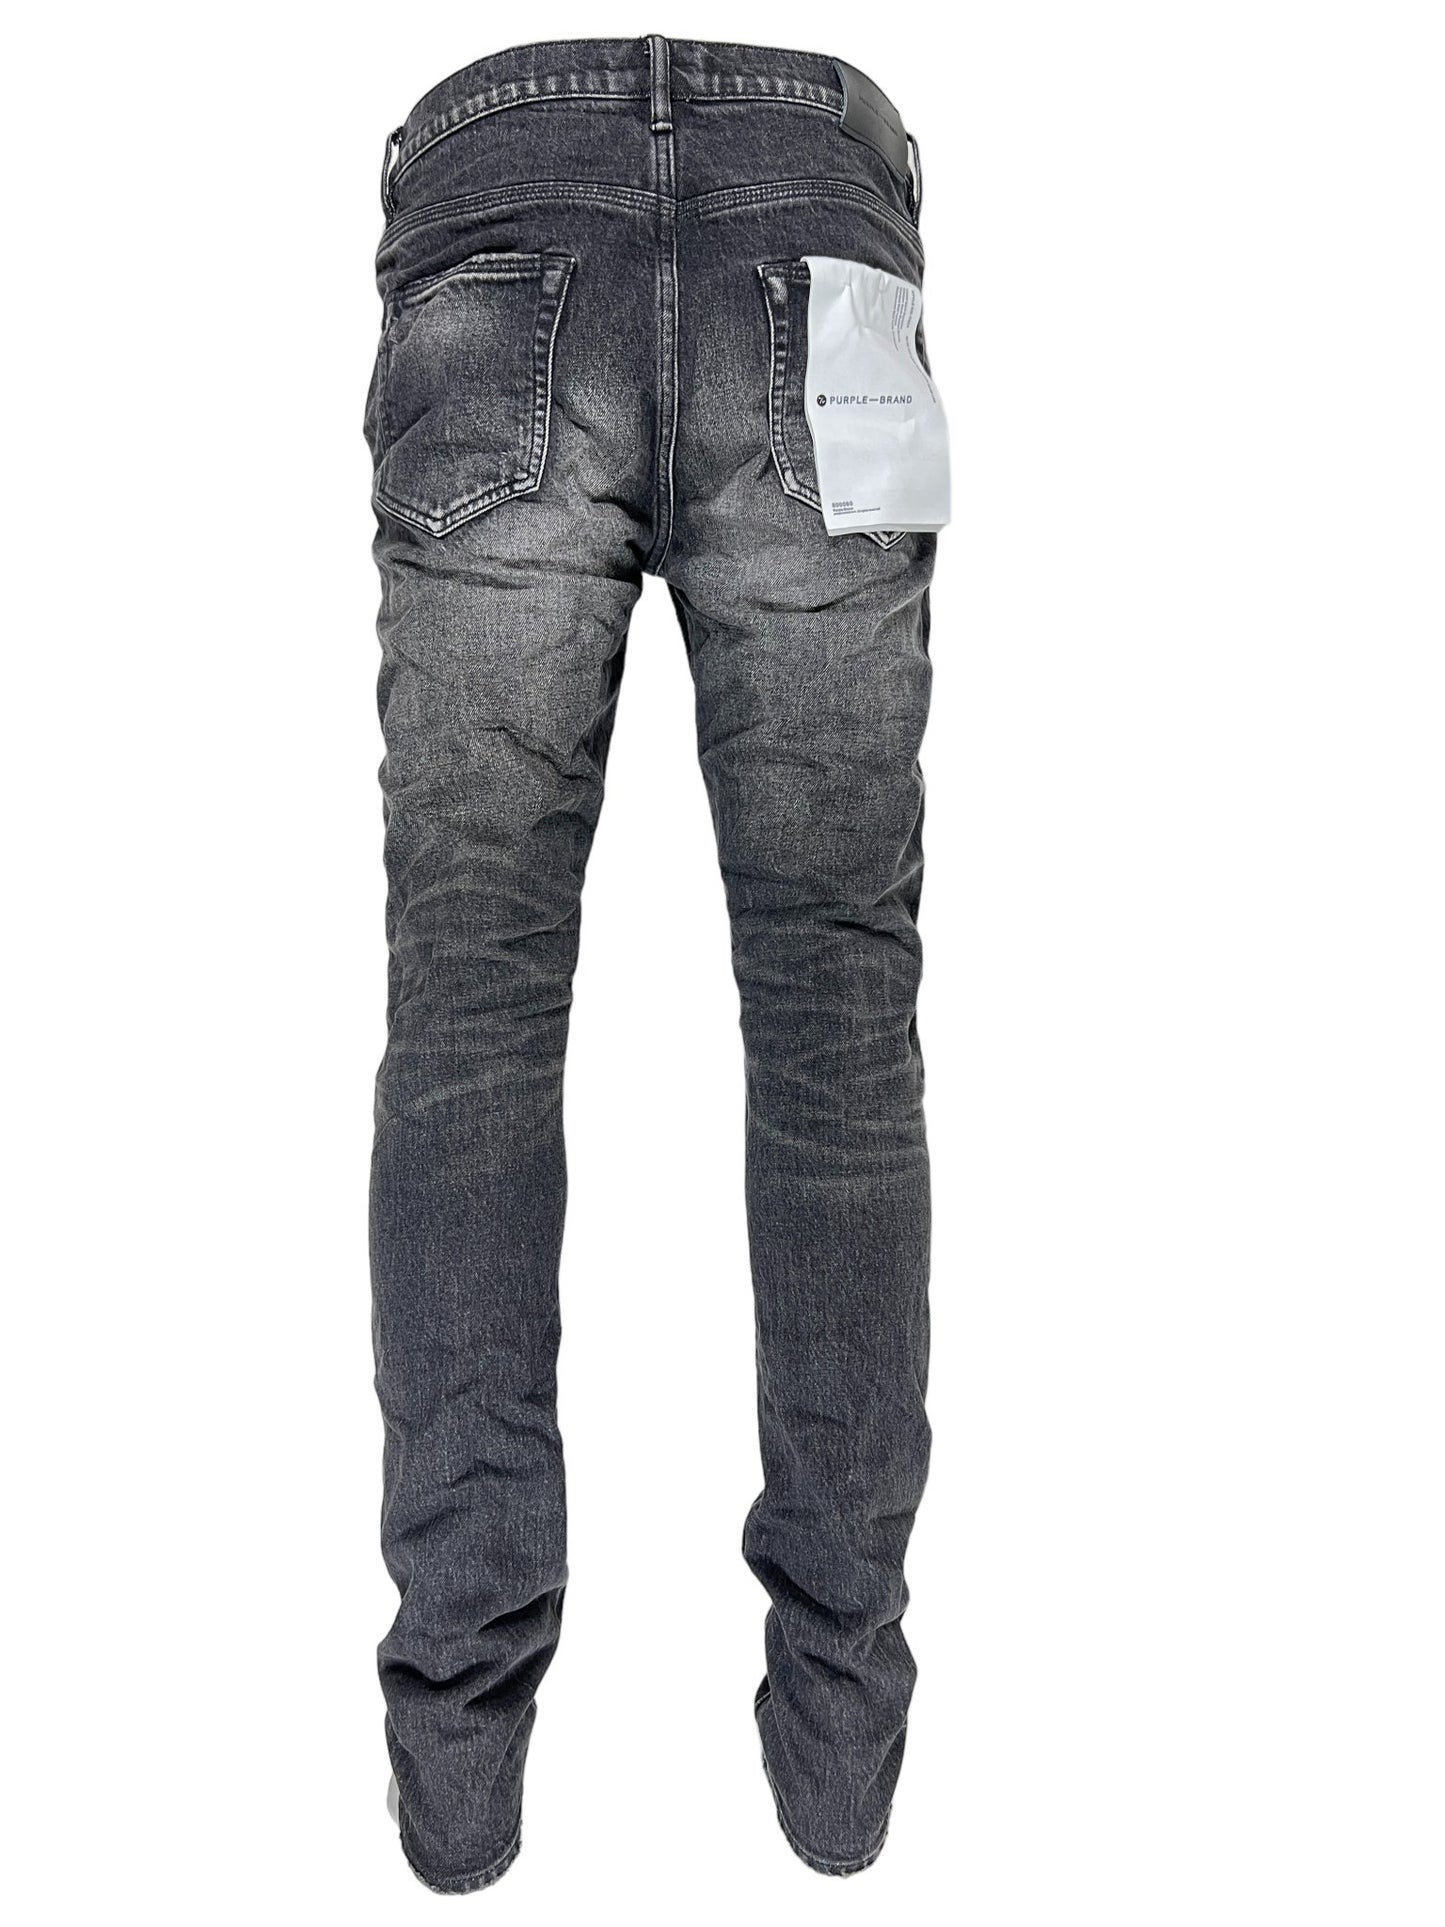 A pair of PURPLE BRAND jeans, style P001-TYFB 2 Year Dirty Fade Black, with a low-rise design and a pocket on the back.